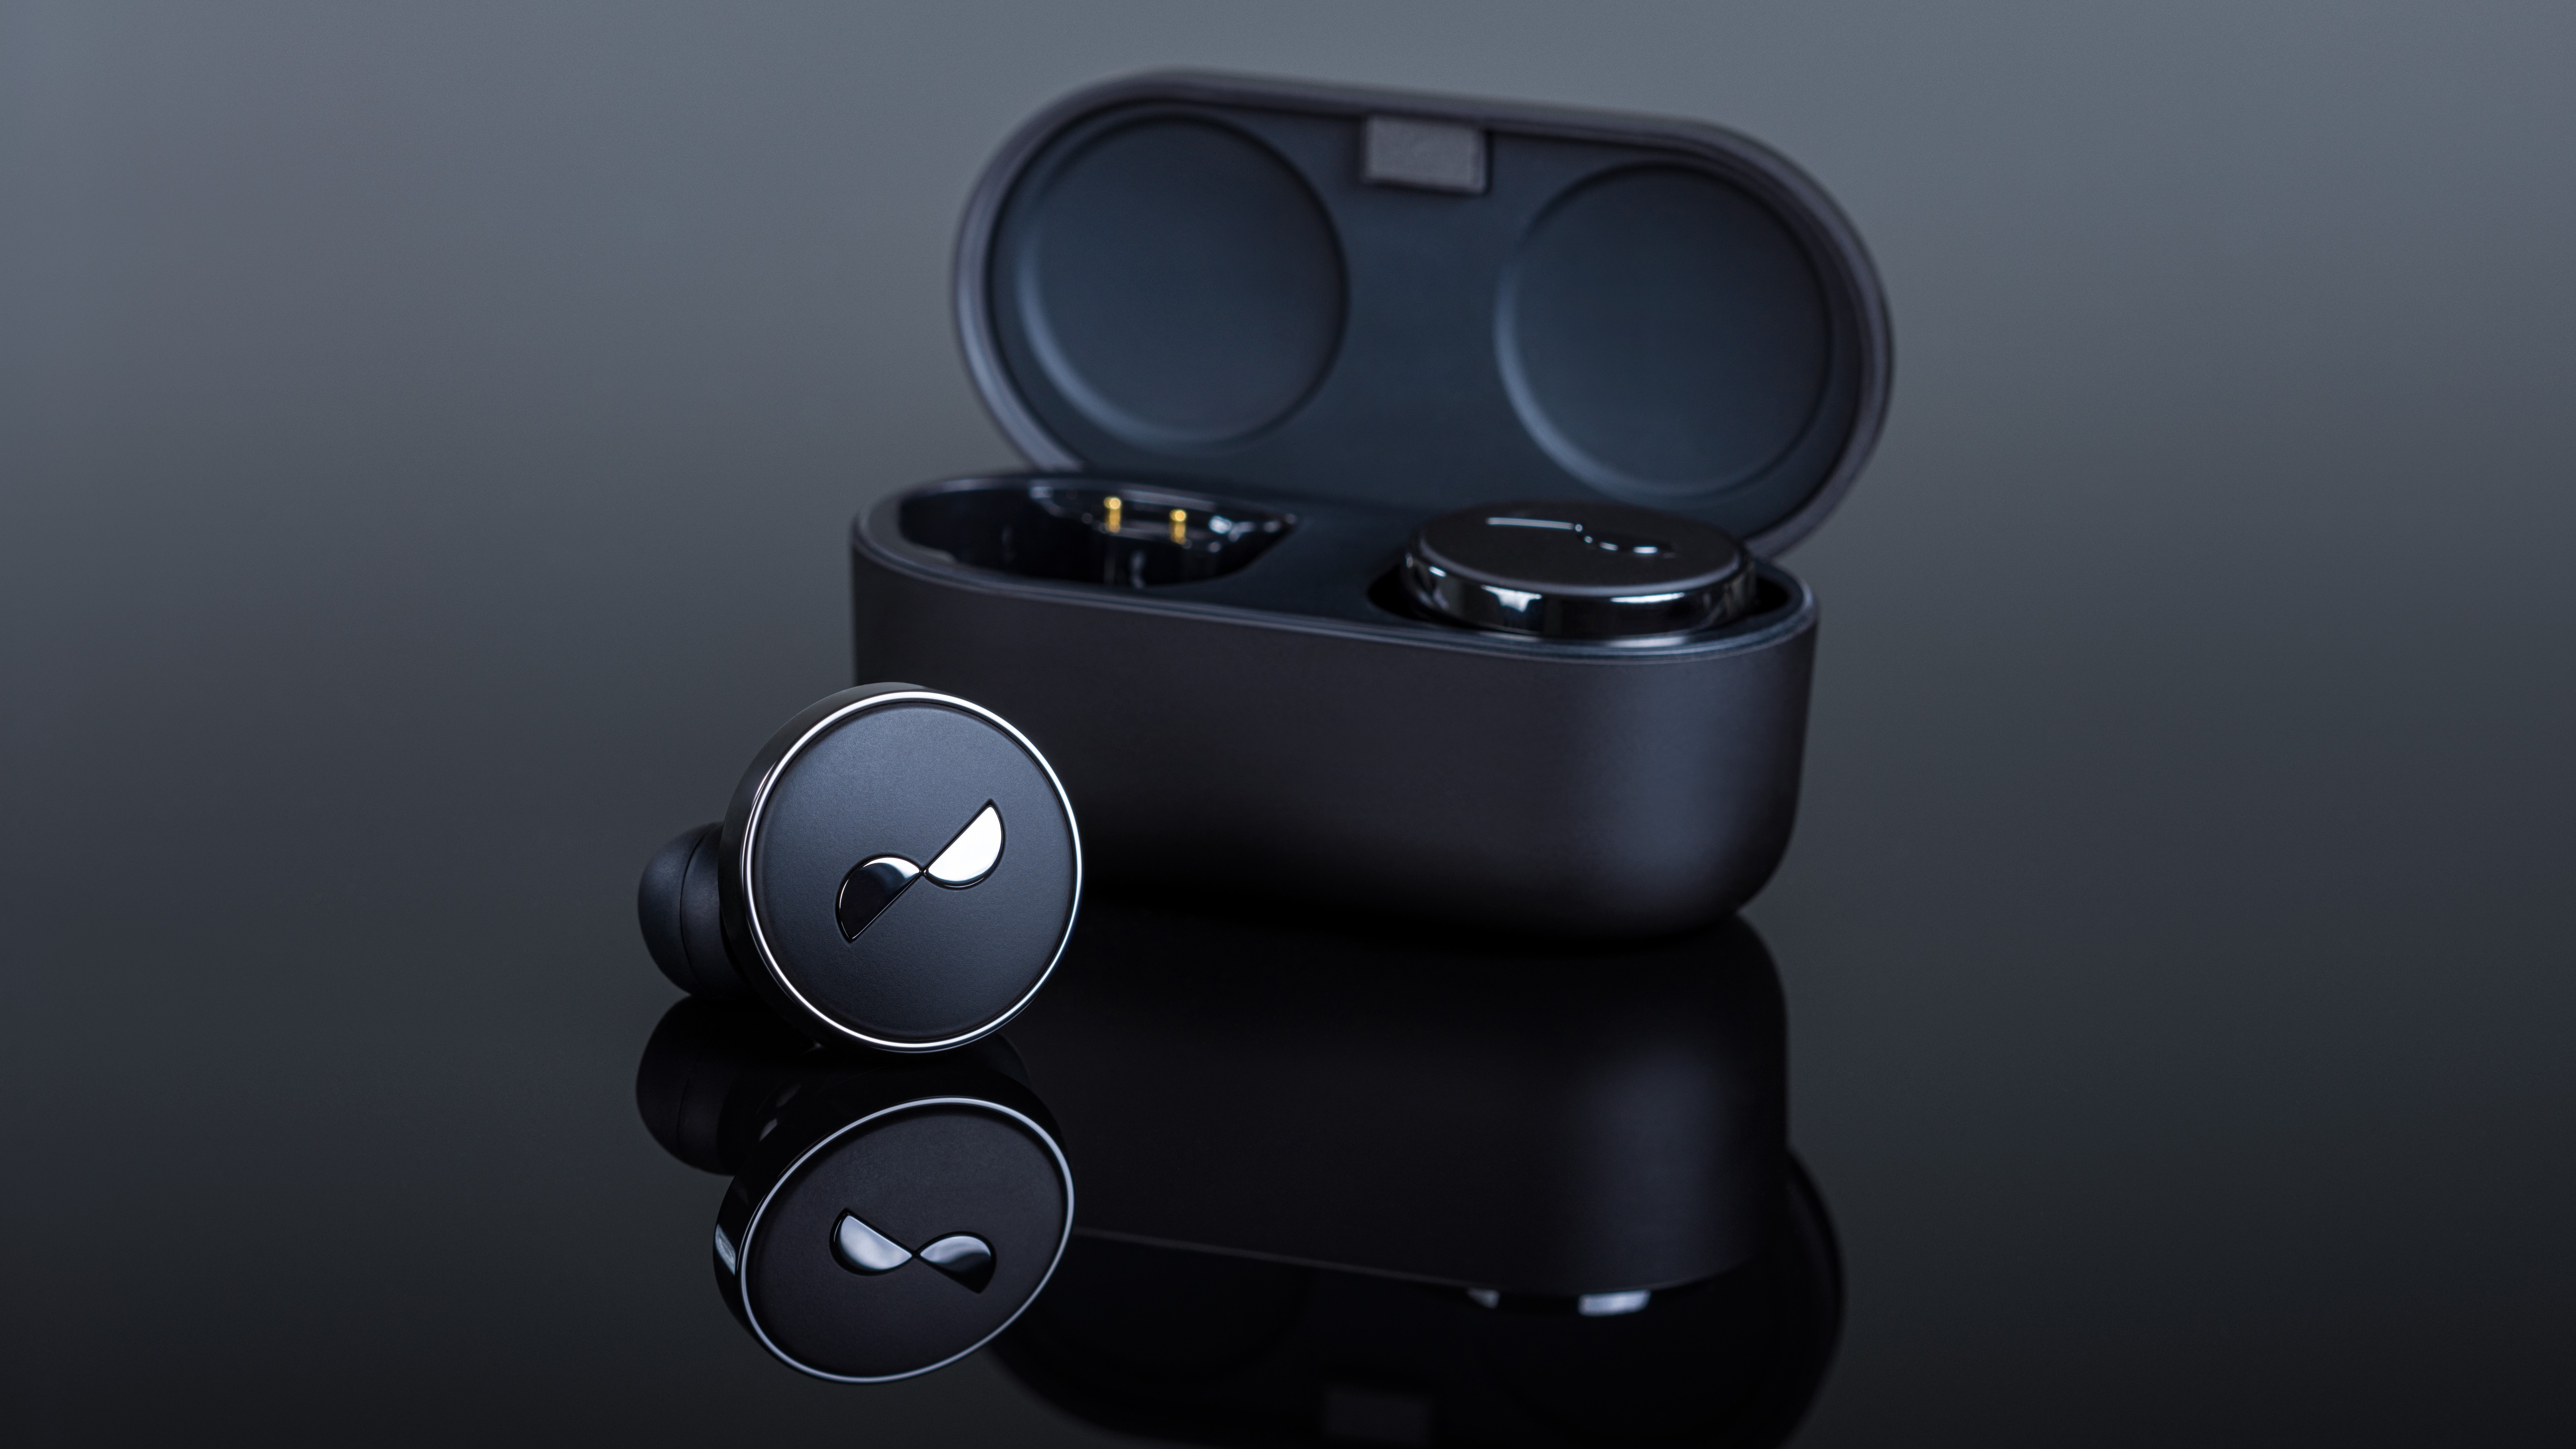 NuraTrue Pro Earphones with Charging Case Open on a Highly Reflective Black Surface